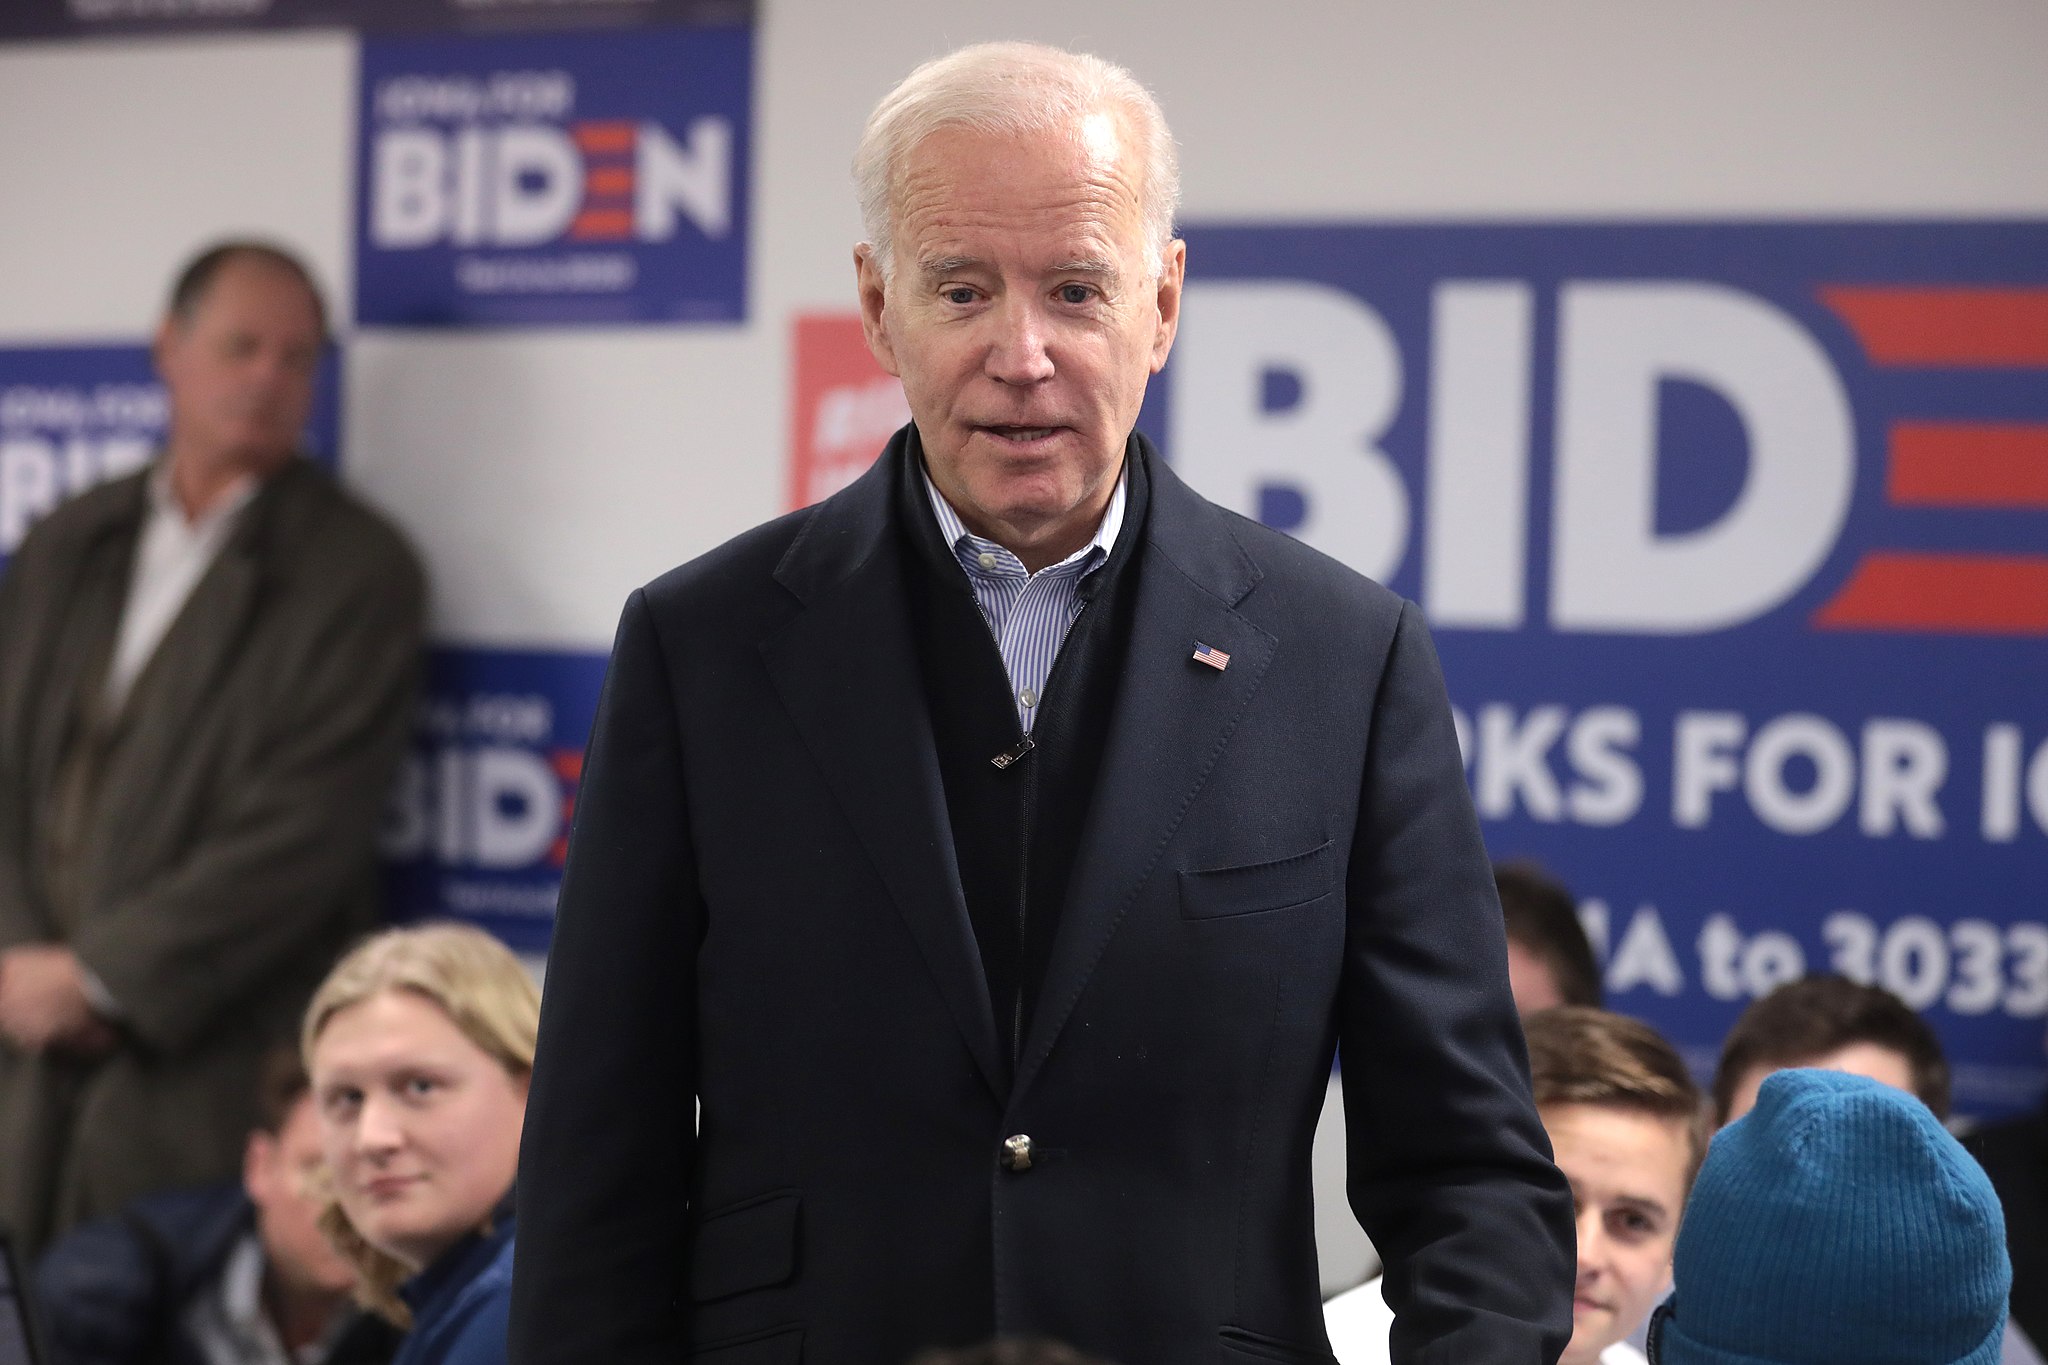 Has Biden Made America Safer Like He Claims?